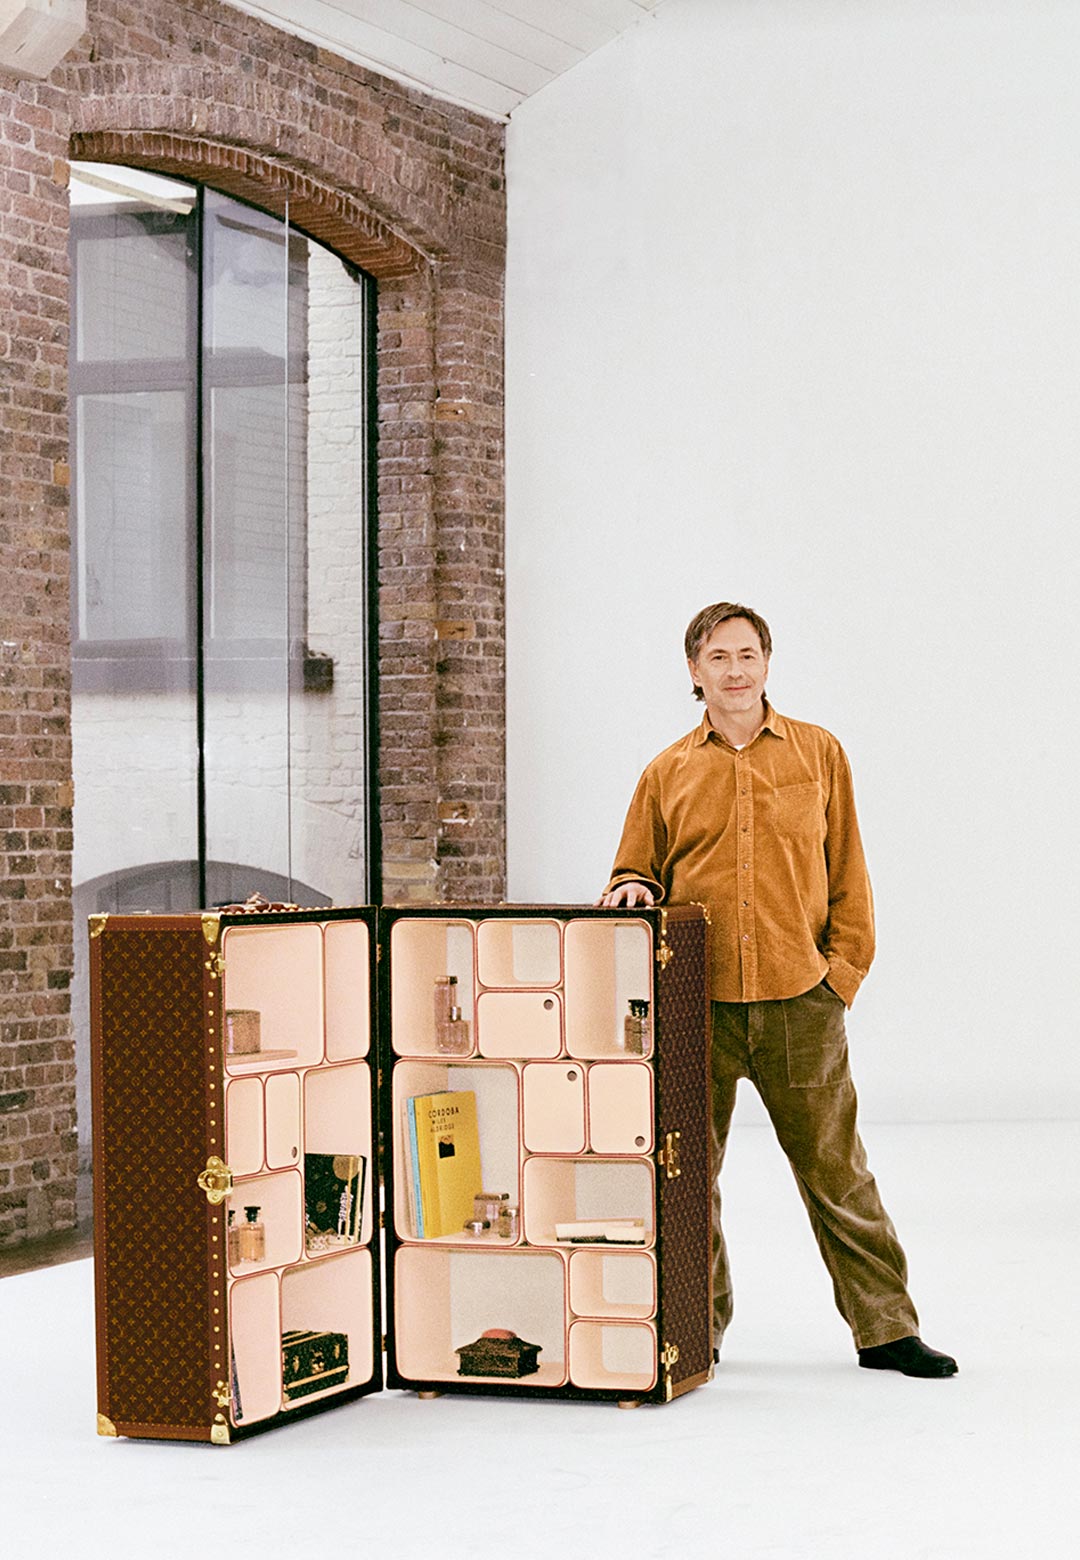 Marc Newson reimagines the Louis Vuitton trunk as a ‘Cabinet of Curiosities’